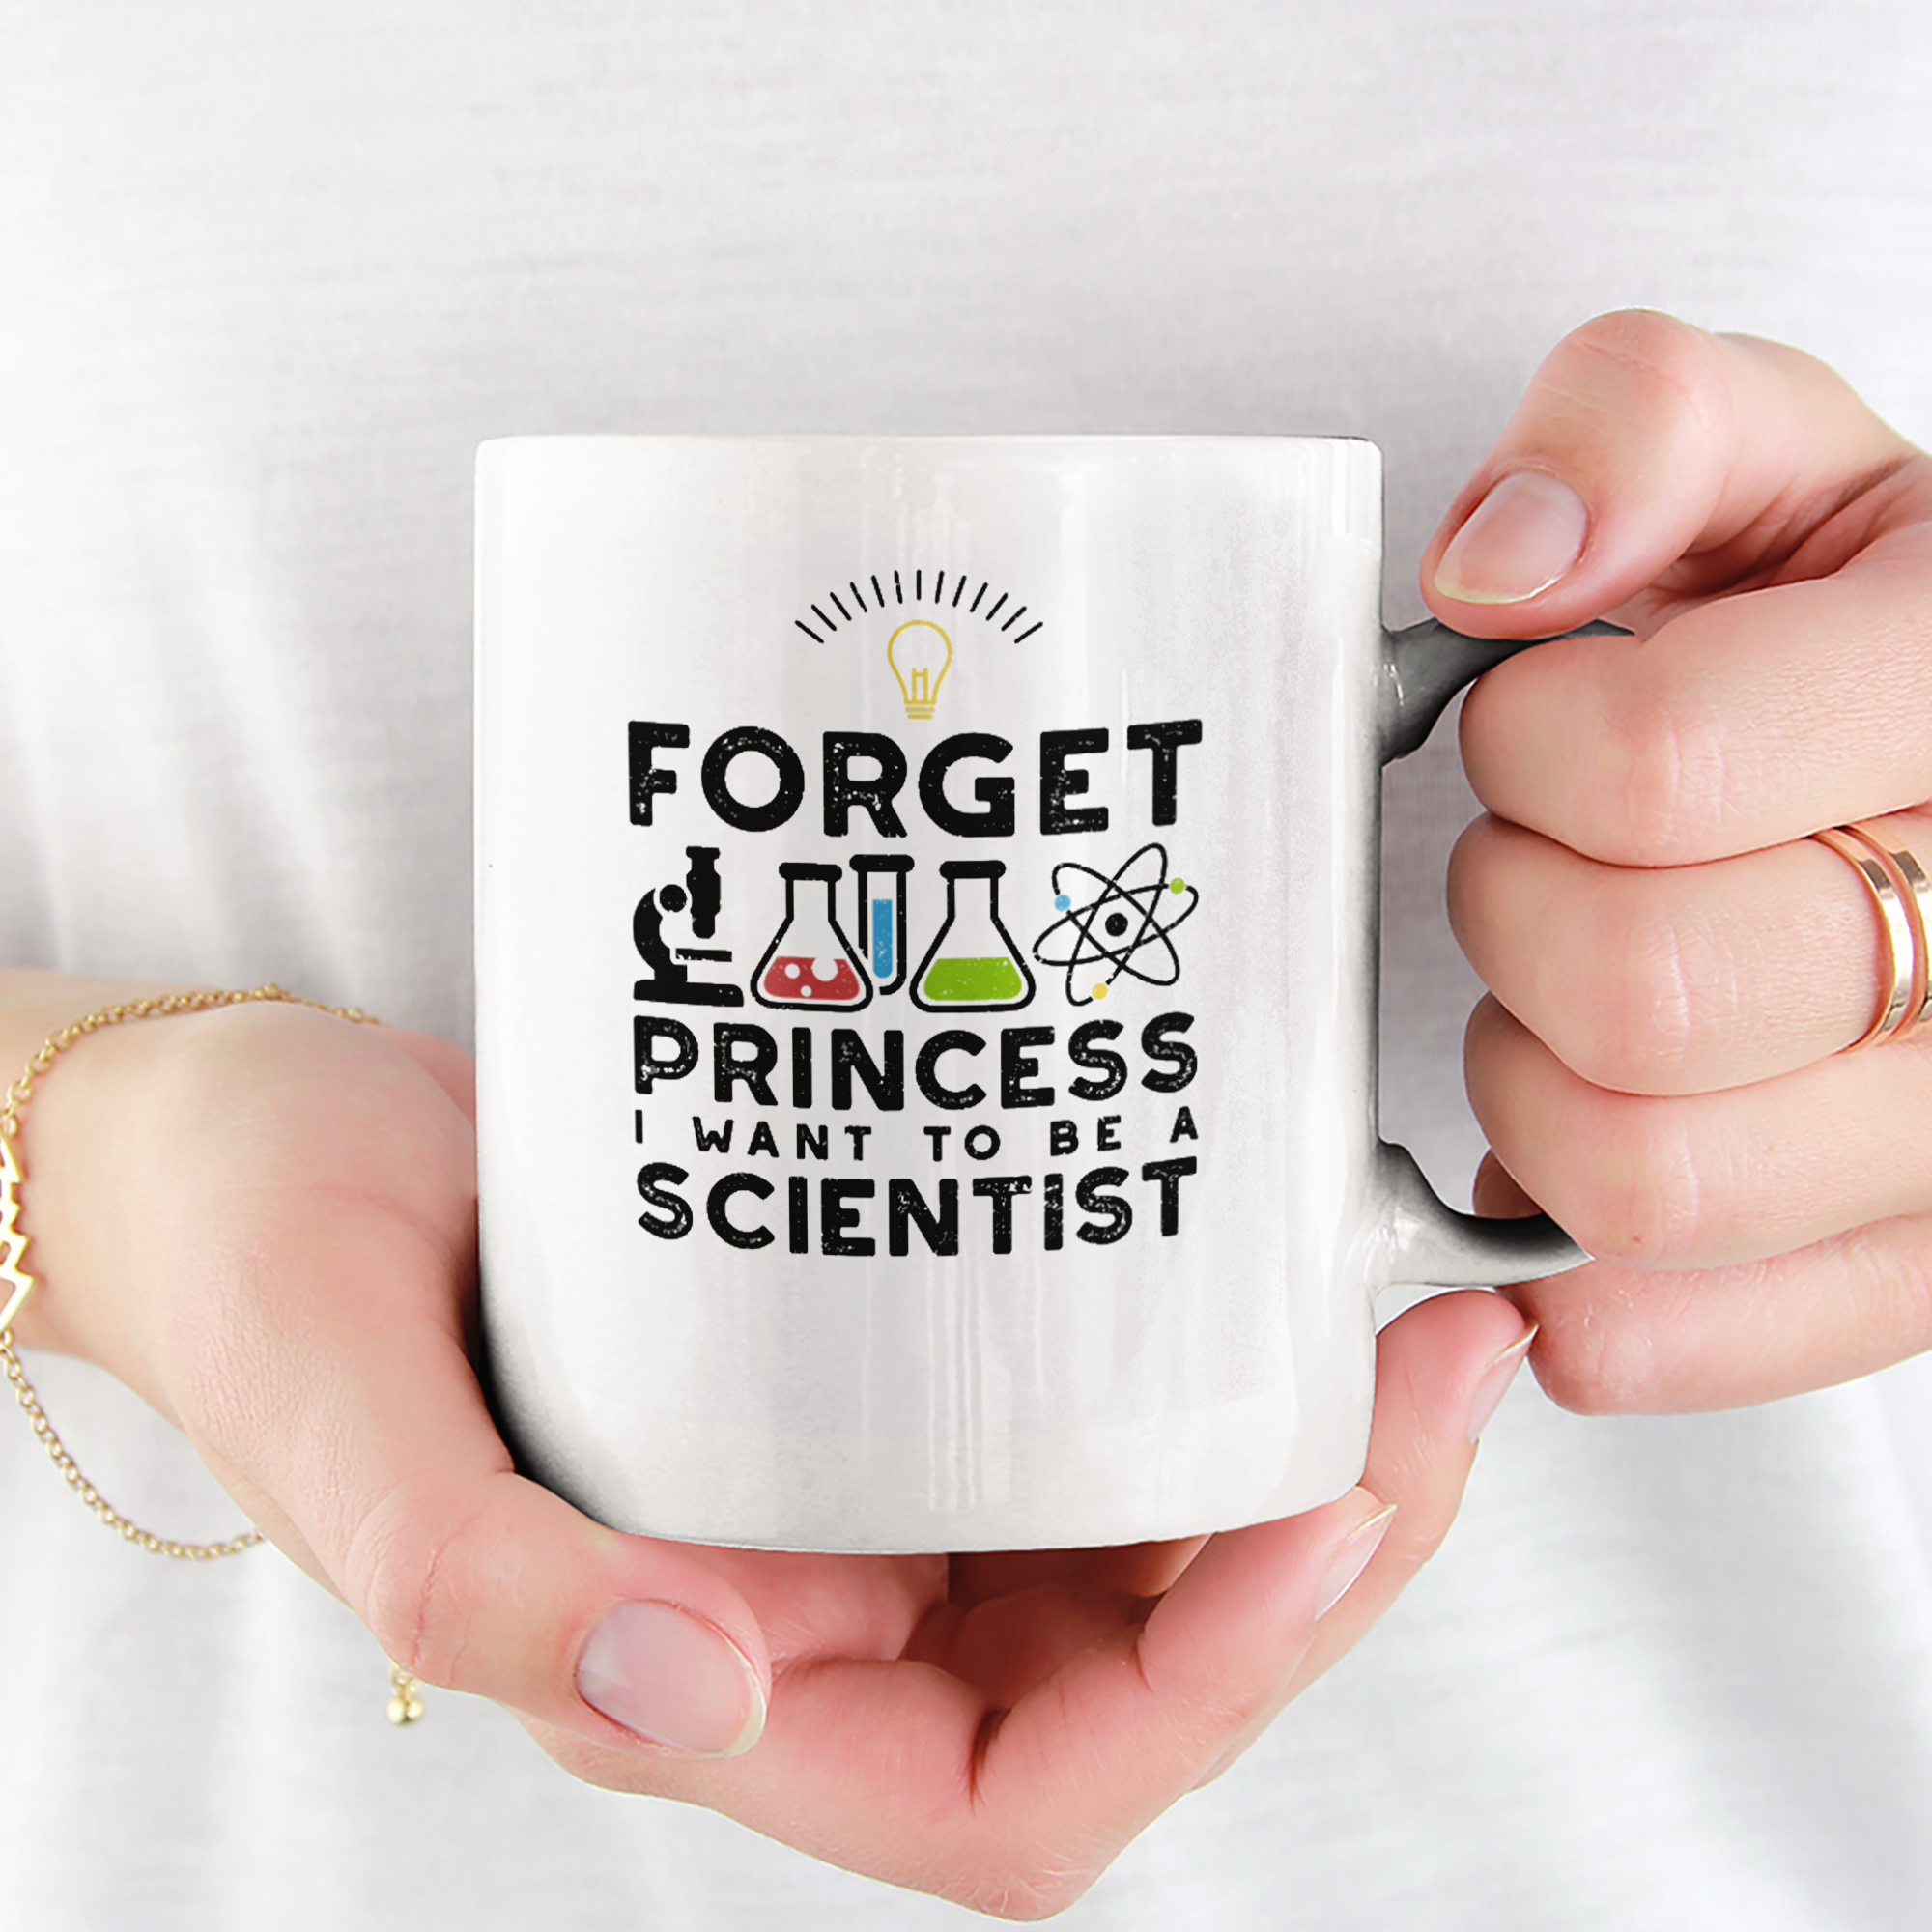 Forget Princess I Want To Be A Scientist Tasse - DESIGNSBYJNK5.COM